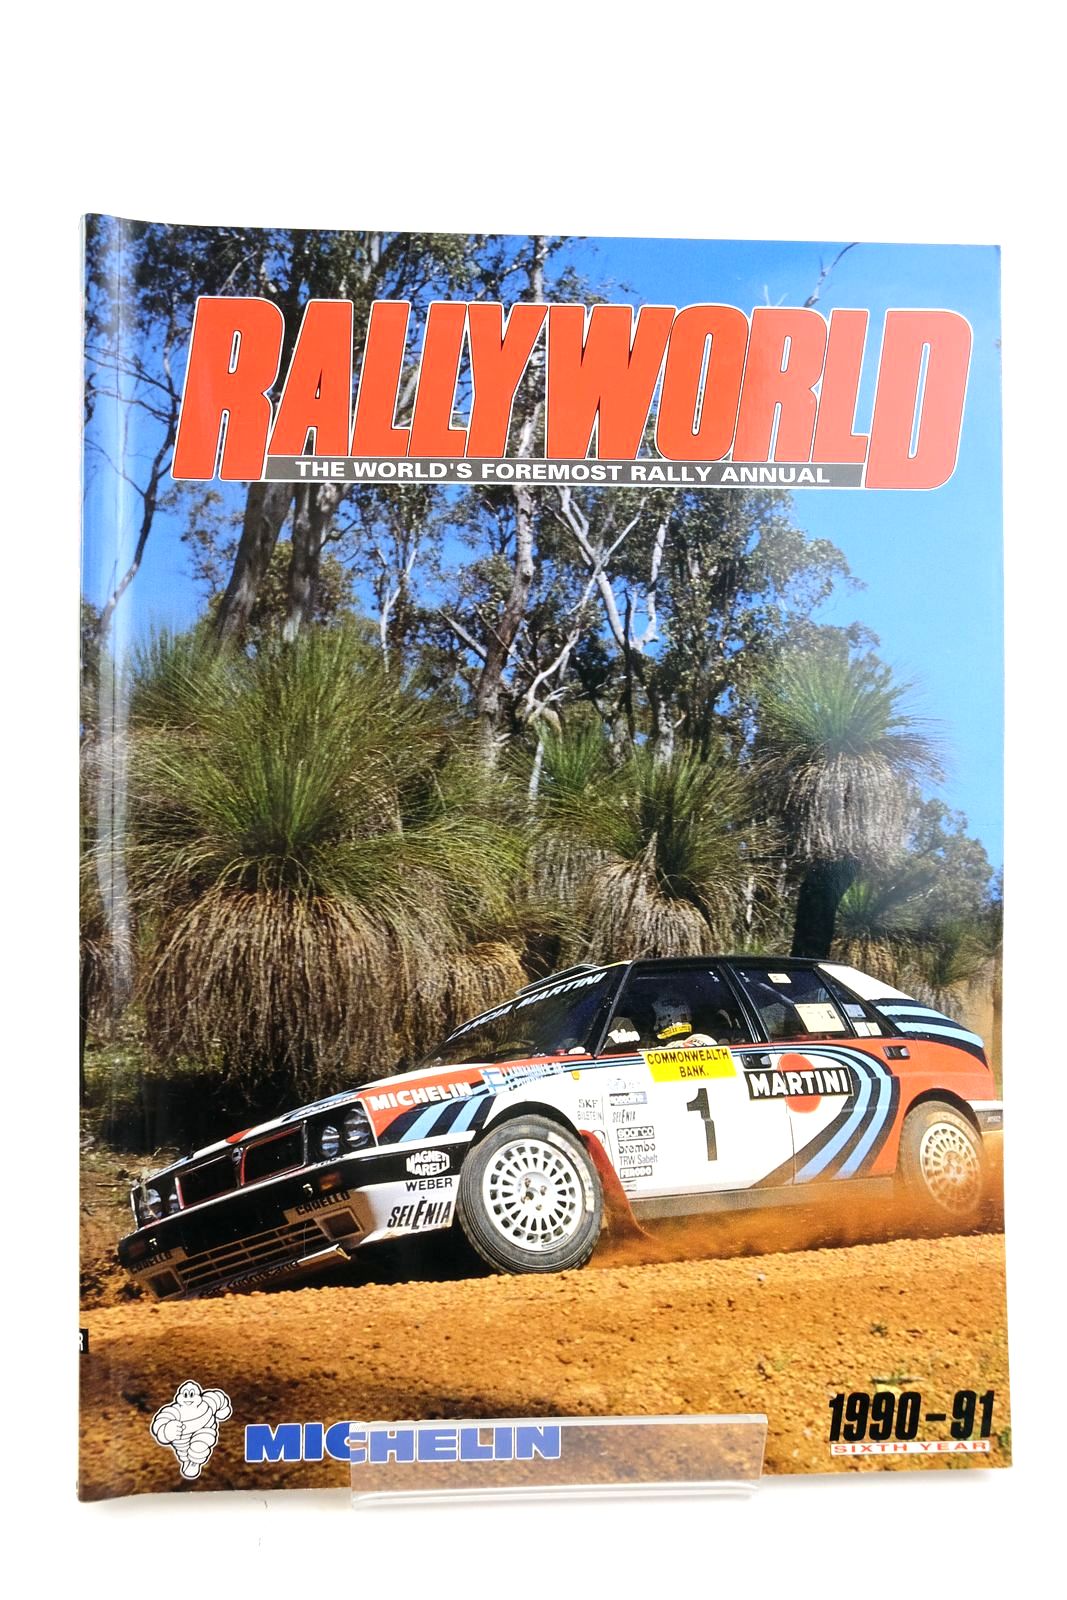 Photo of RALLYWORLD 1990-91 published by Tudor Journals (STOCK CODE: 2132751)  for sale by Stella & Rose's Books